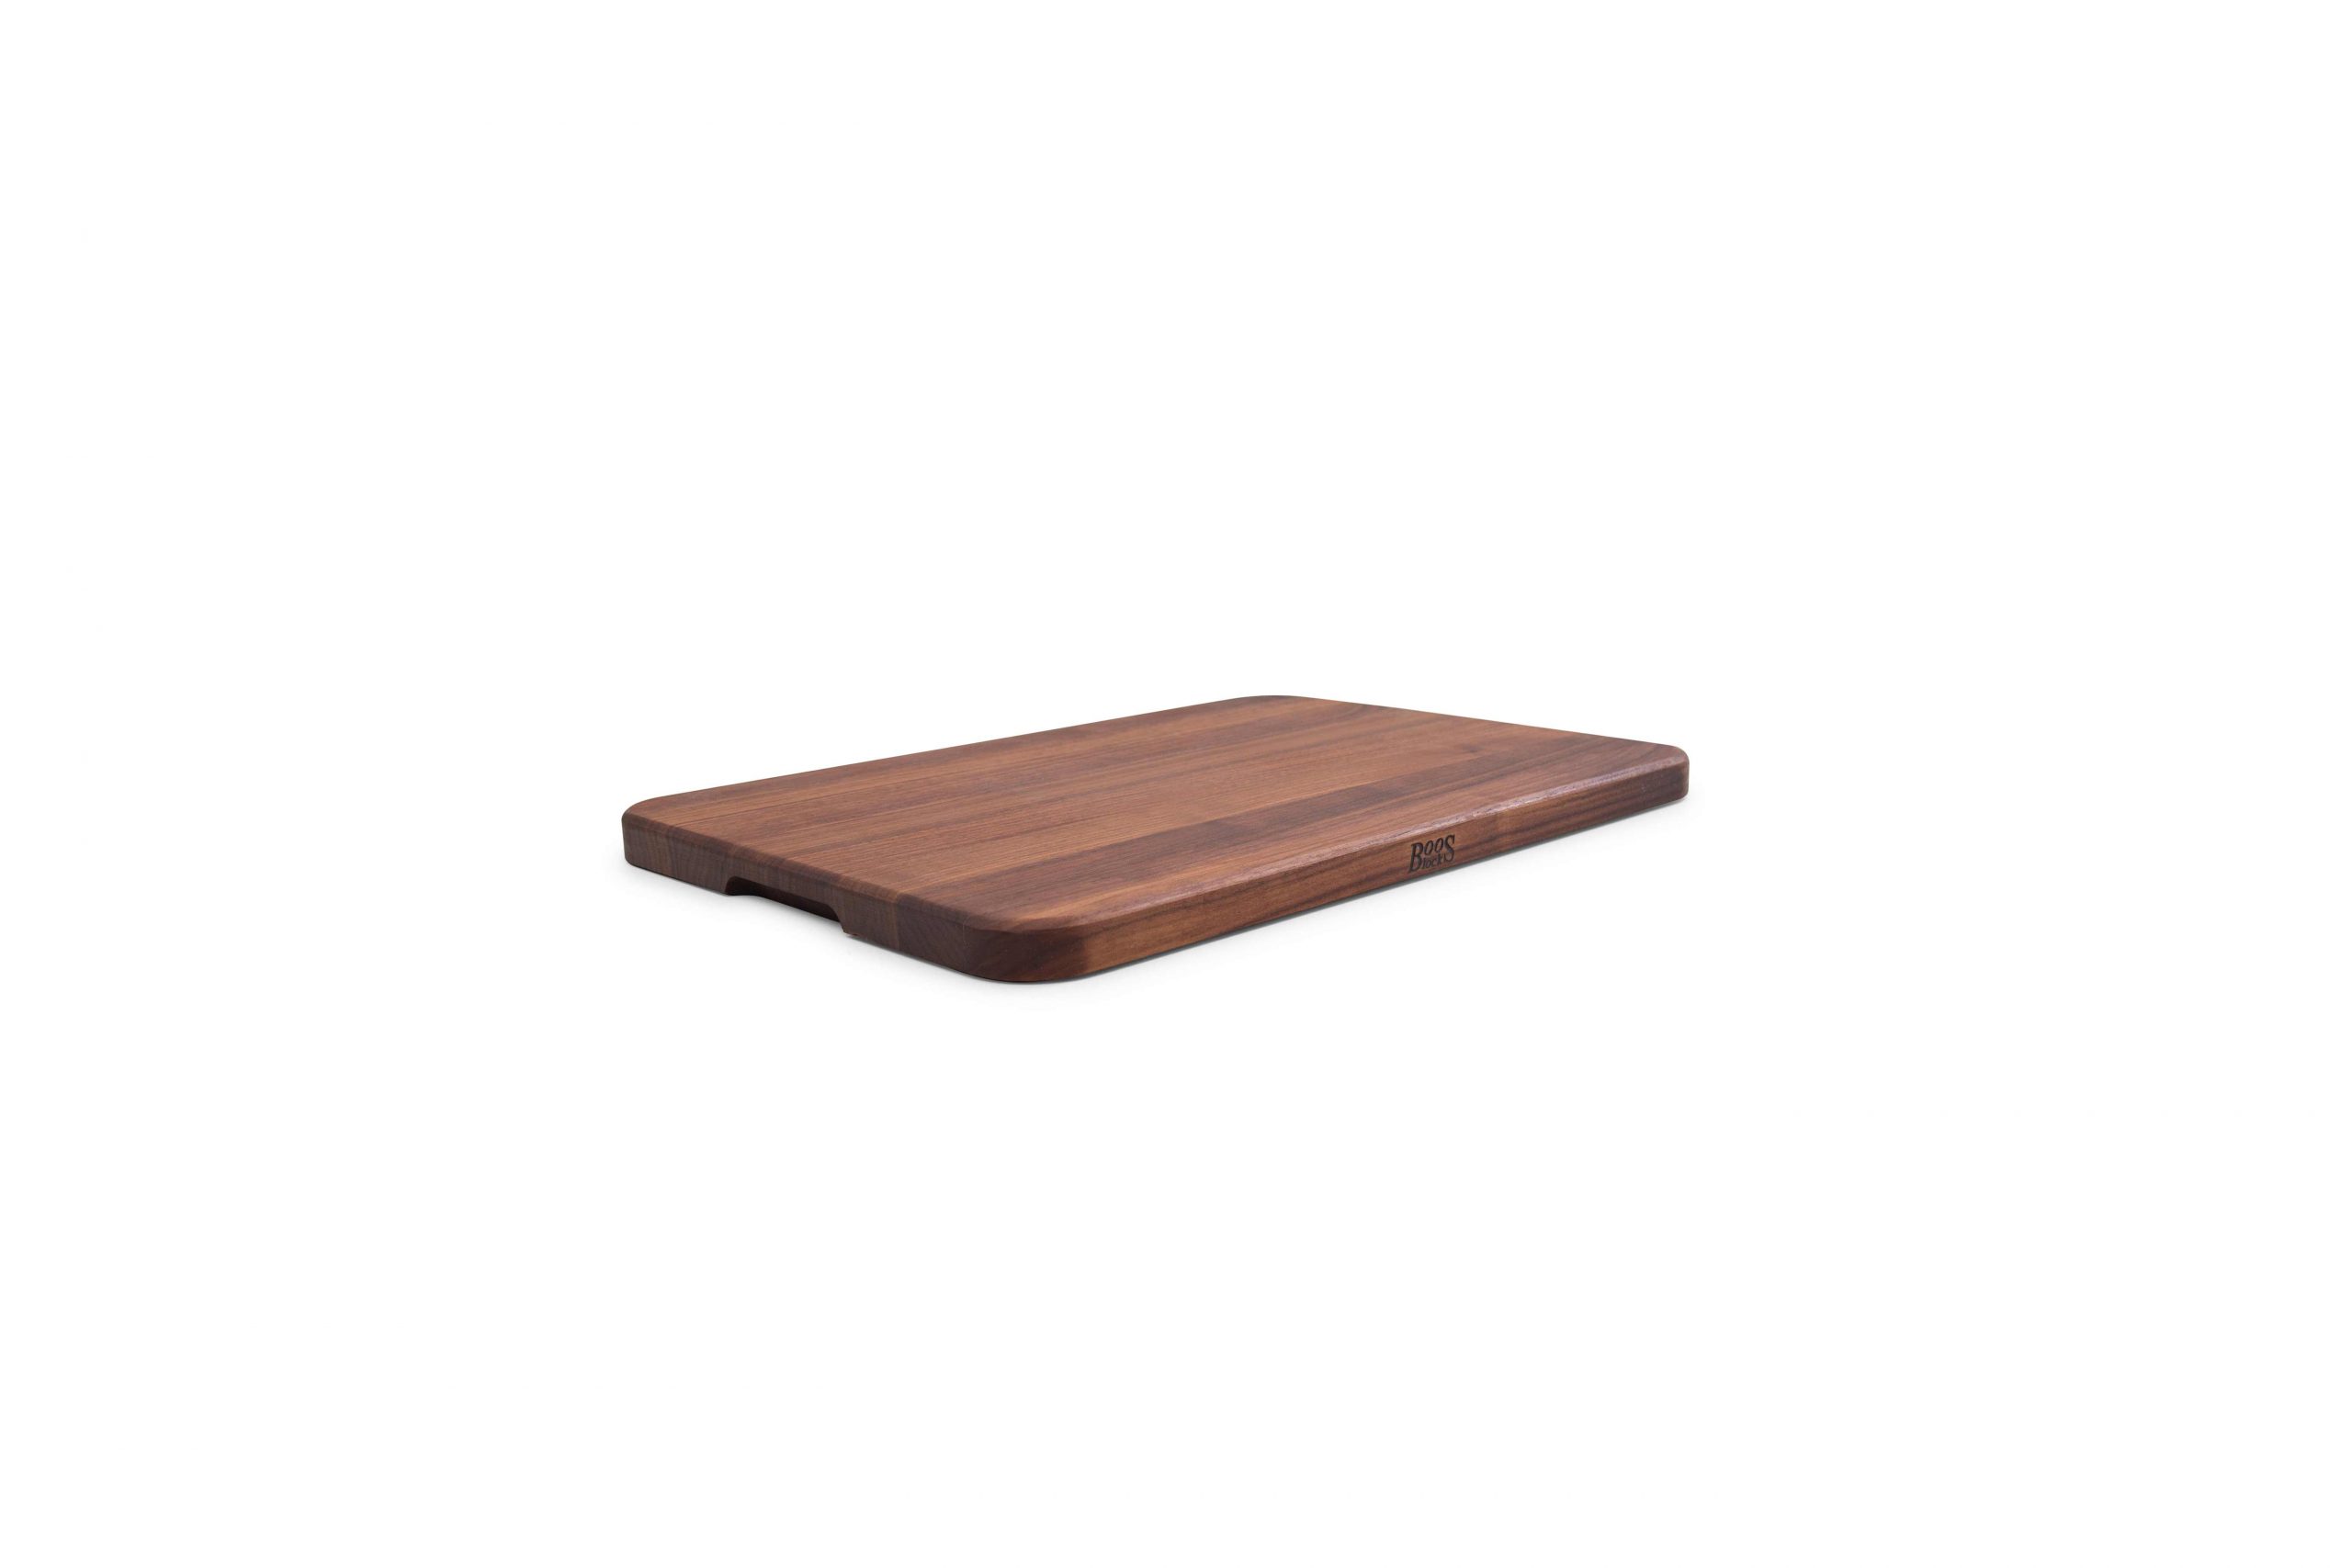 Chop-N-Serve Black Walnut cutting board with recessed handles; can be used on both sides 9